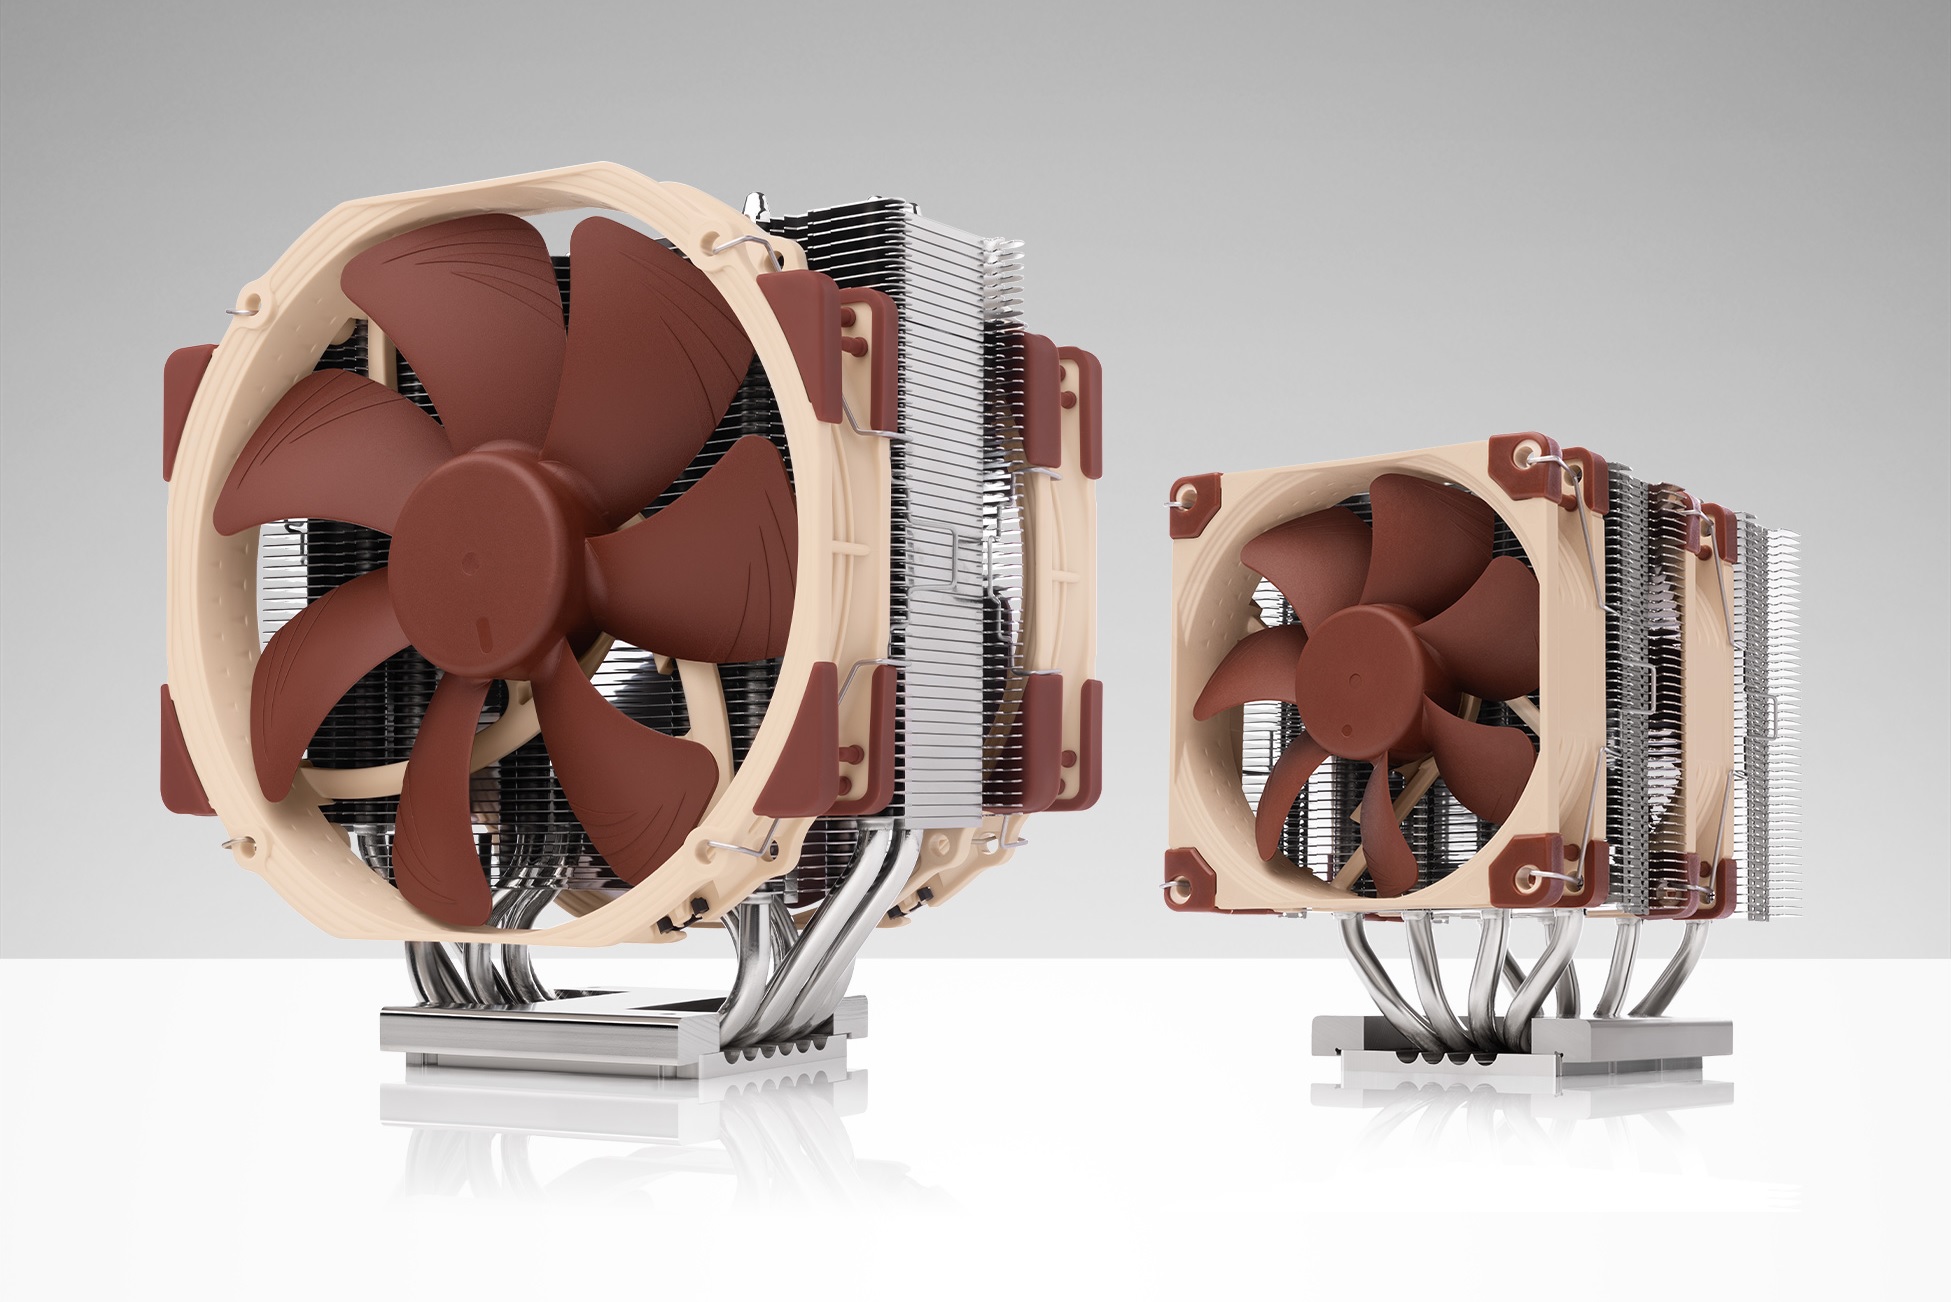 Noctua unleashes new CPU coolers for AMD’s new Threadripper and EPYC processors